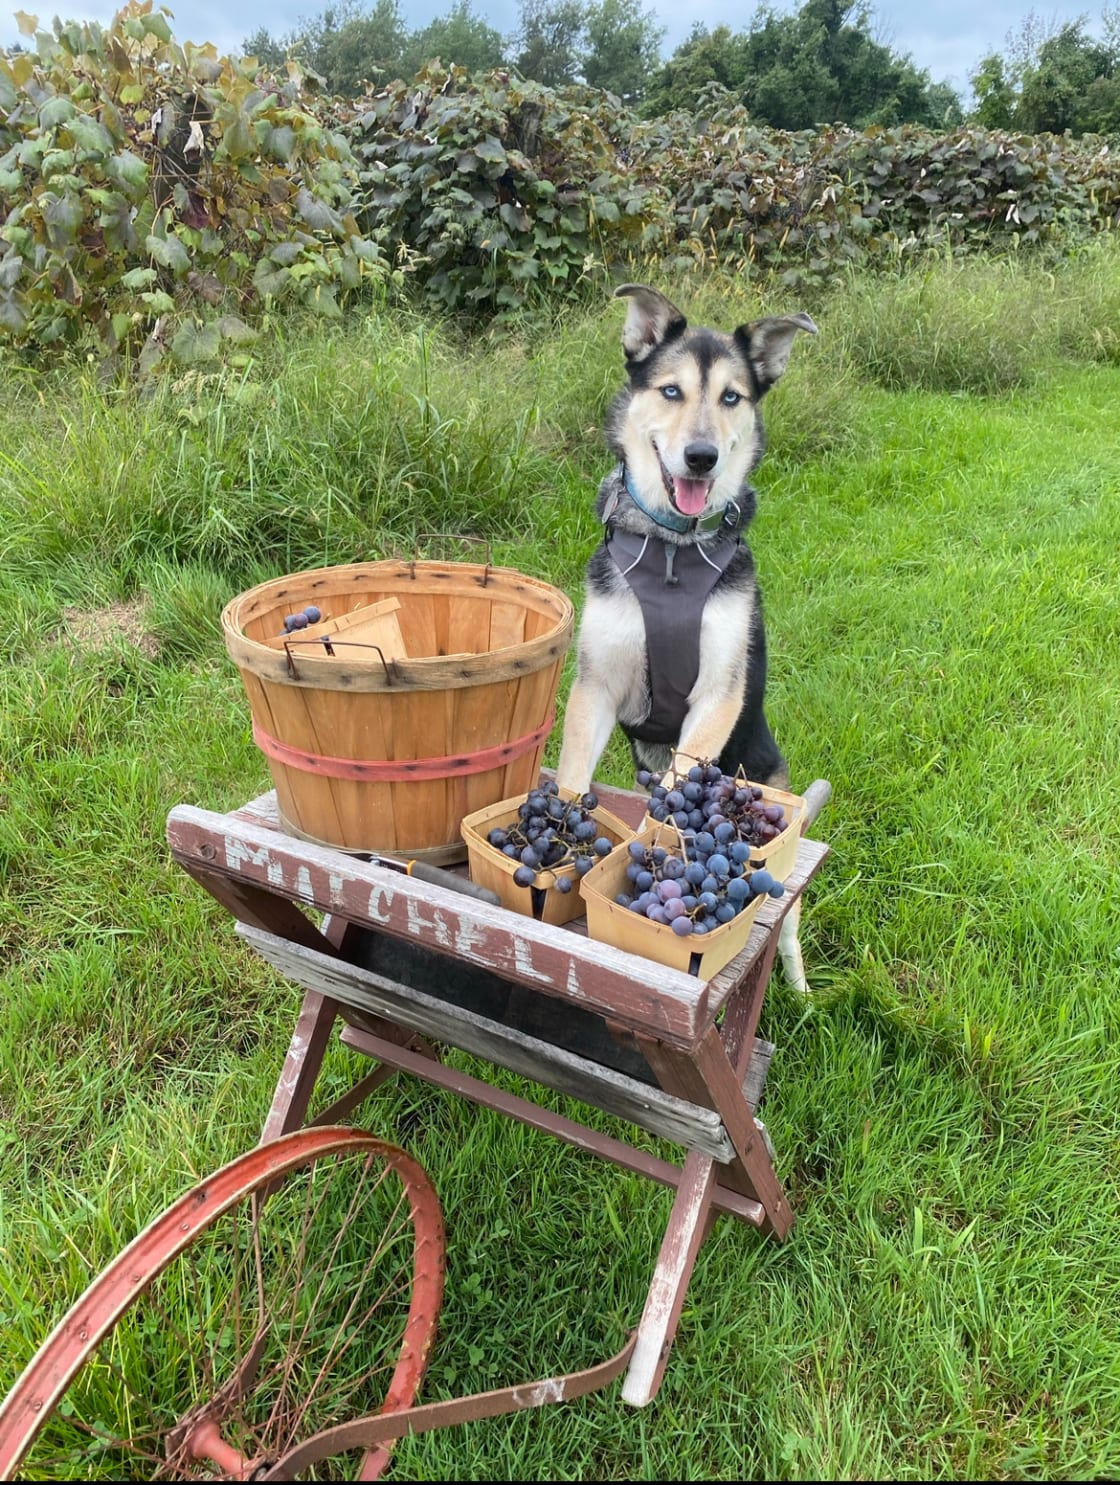 Our dogs love this property! (please remember dogs should not eat grapes). This vintage cart is available for use on site.